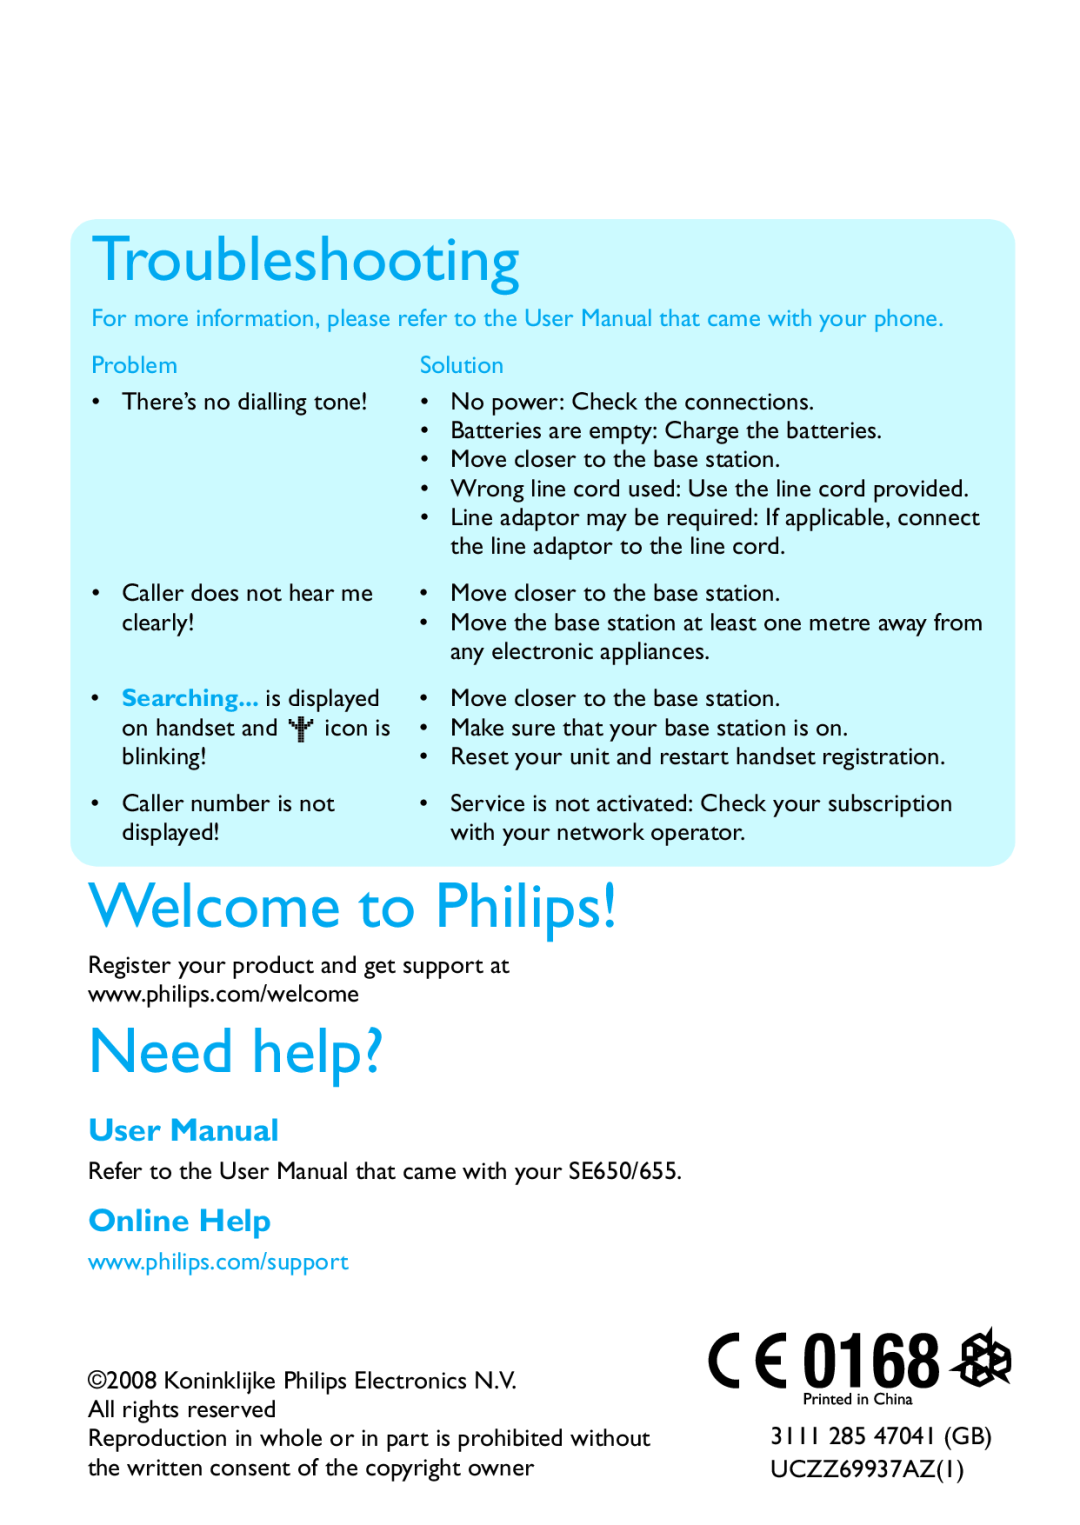 Philips SE650, SE655 Troubleshooting, Welcome to Philips, Need help?, Problem, Solution, User Manual, Online Help 